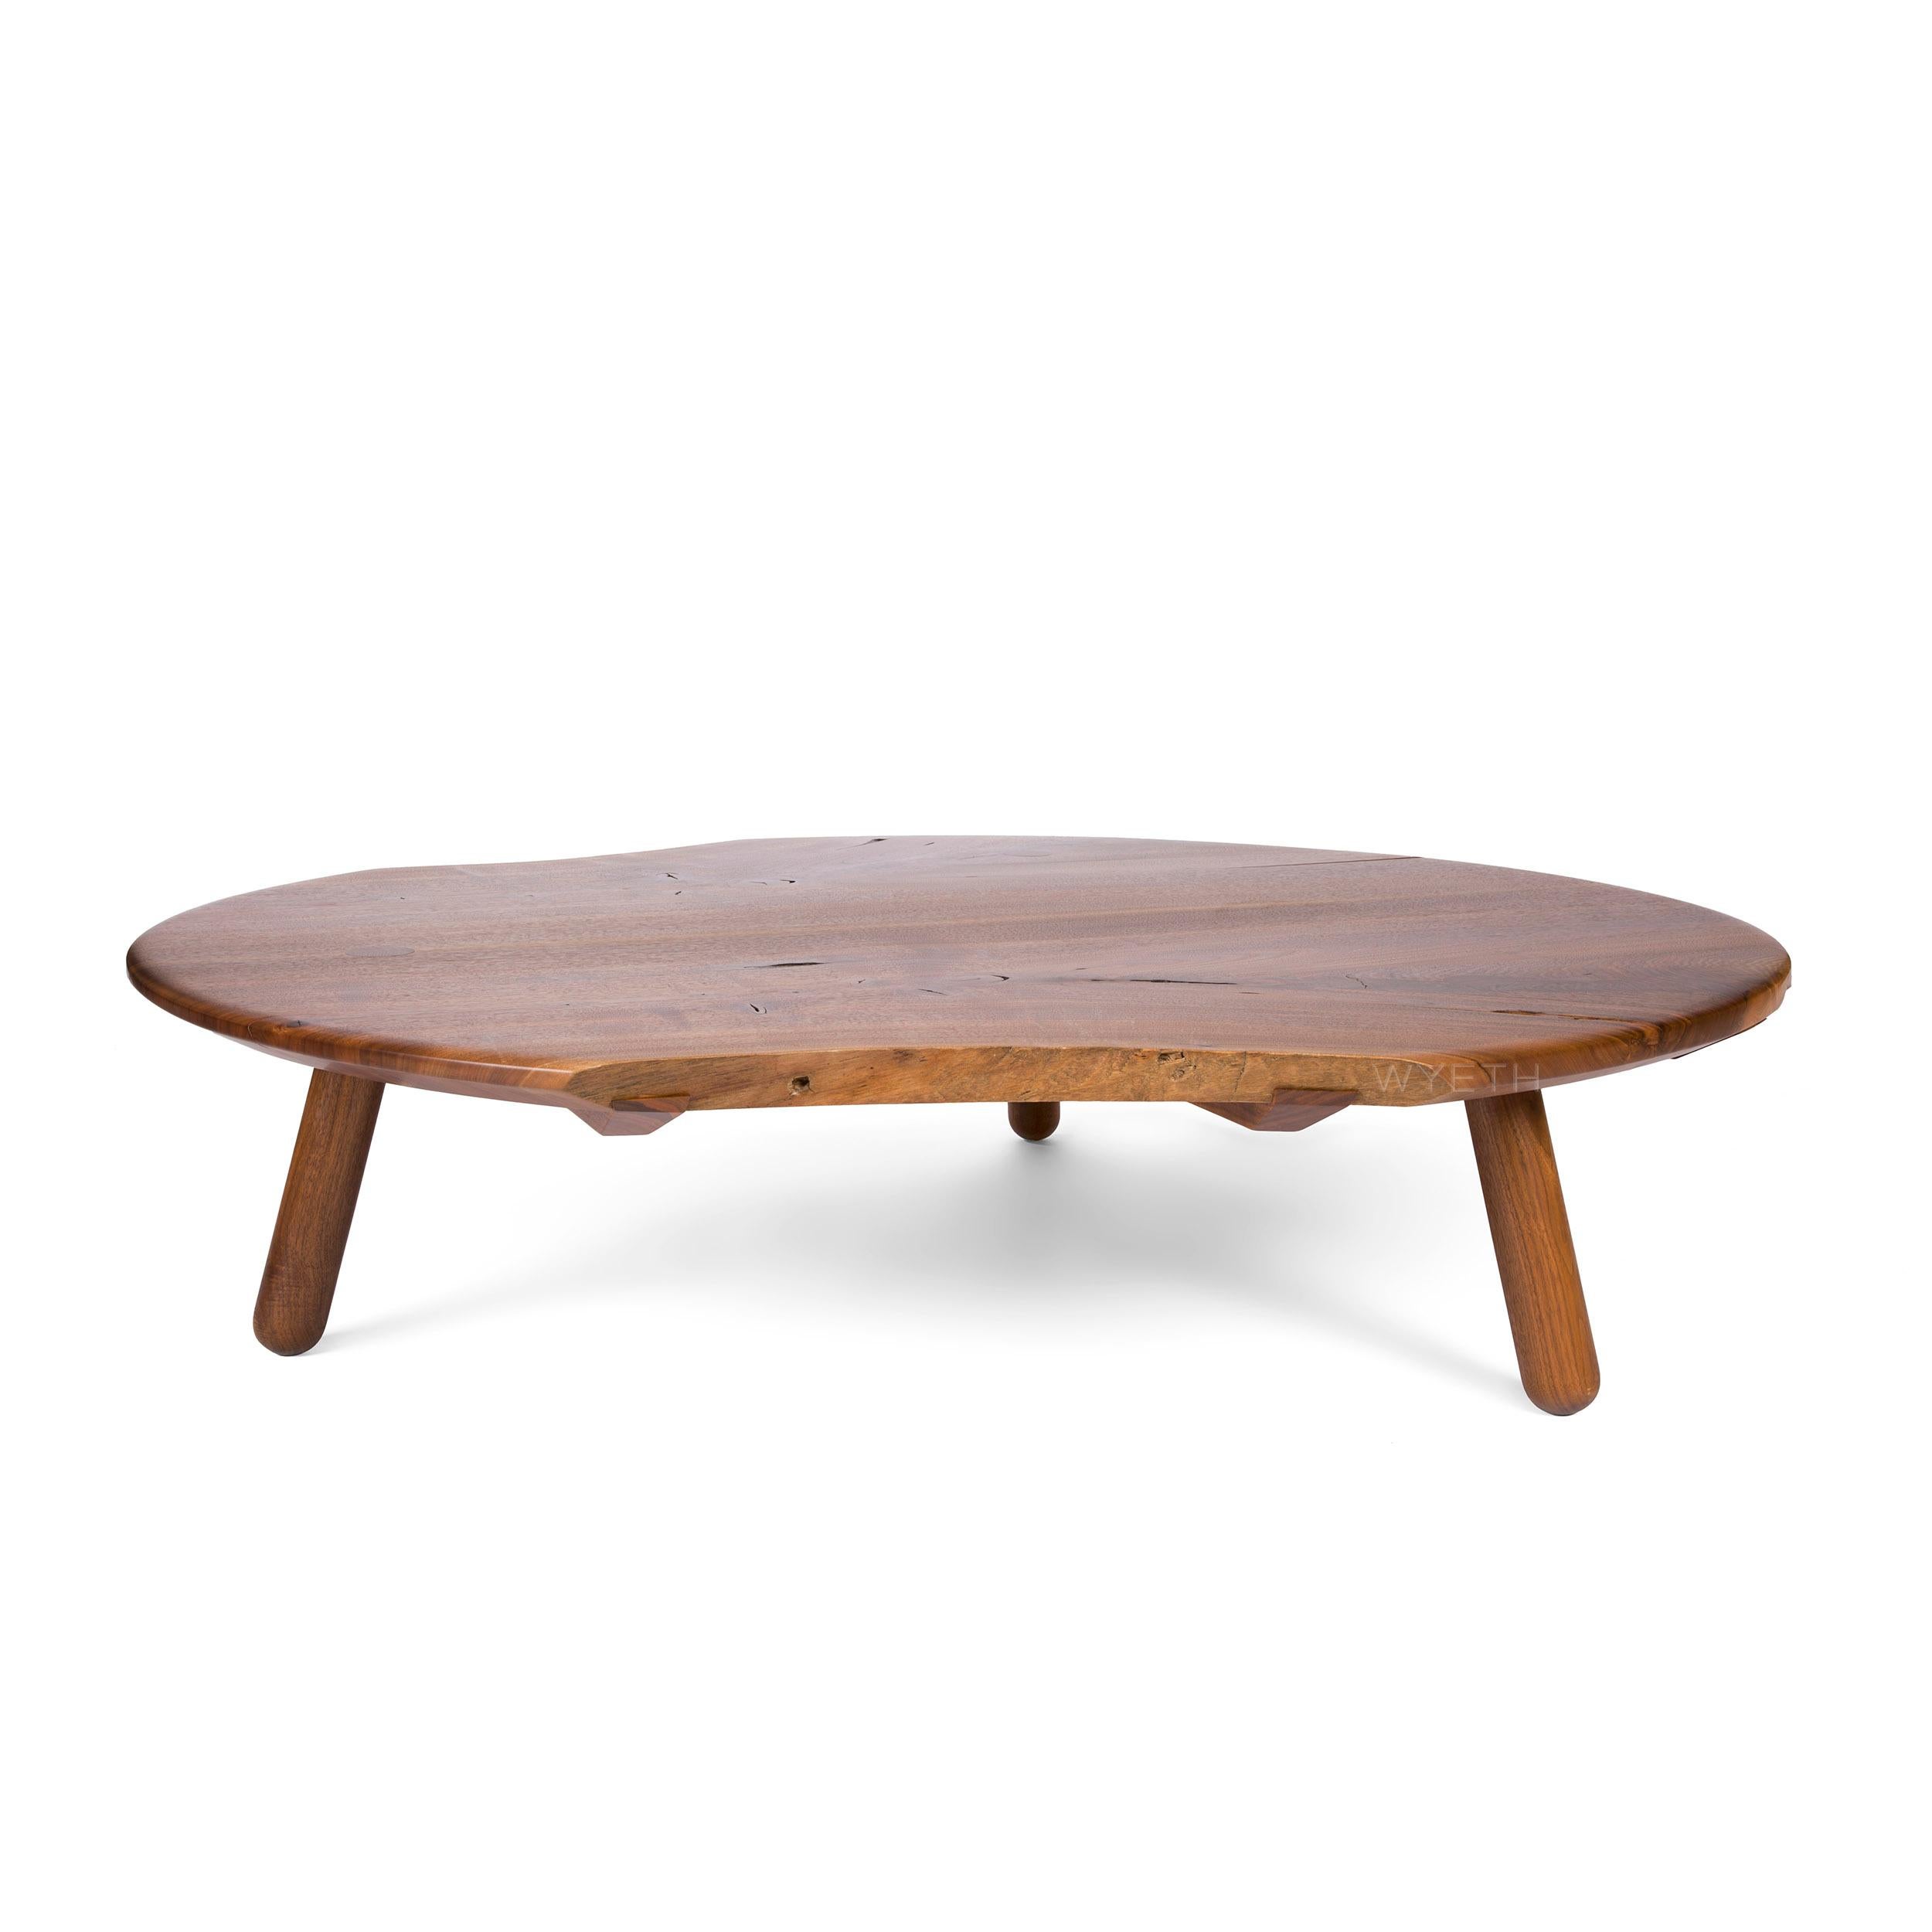 A low cocktail / coffee table in solid walnut wood with a round form. Table features natural edges when innate in the wood and three (3) substantial turned legs that are mortised through the top. The top consists of live edges, and solid boards